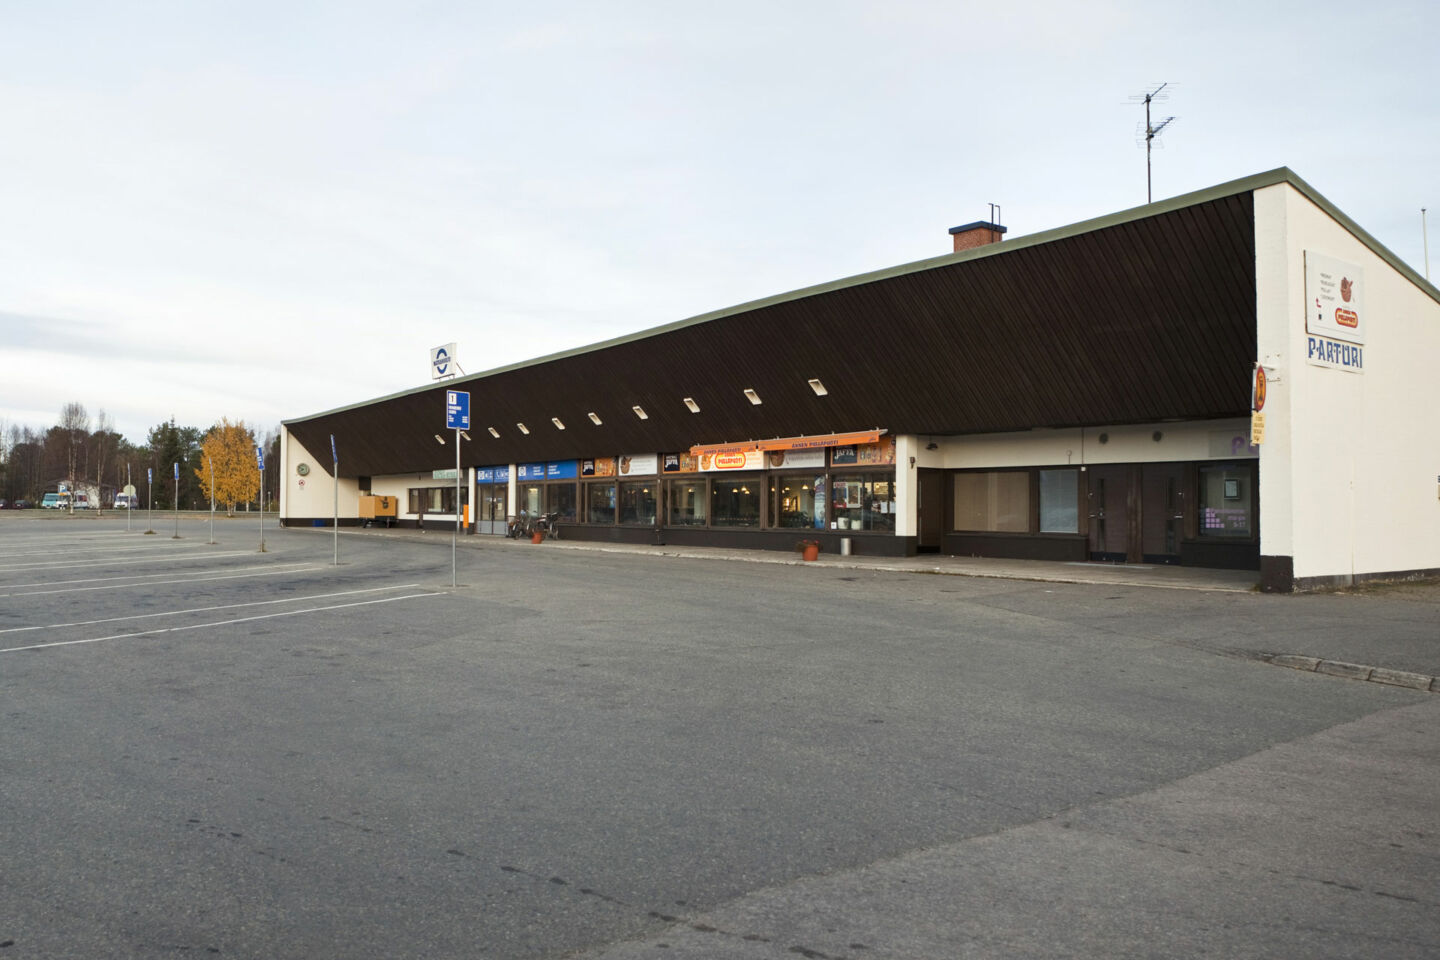 Bus station in the retro town of Sodankylä, a filming location in Finnish Lapland